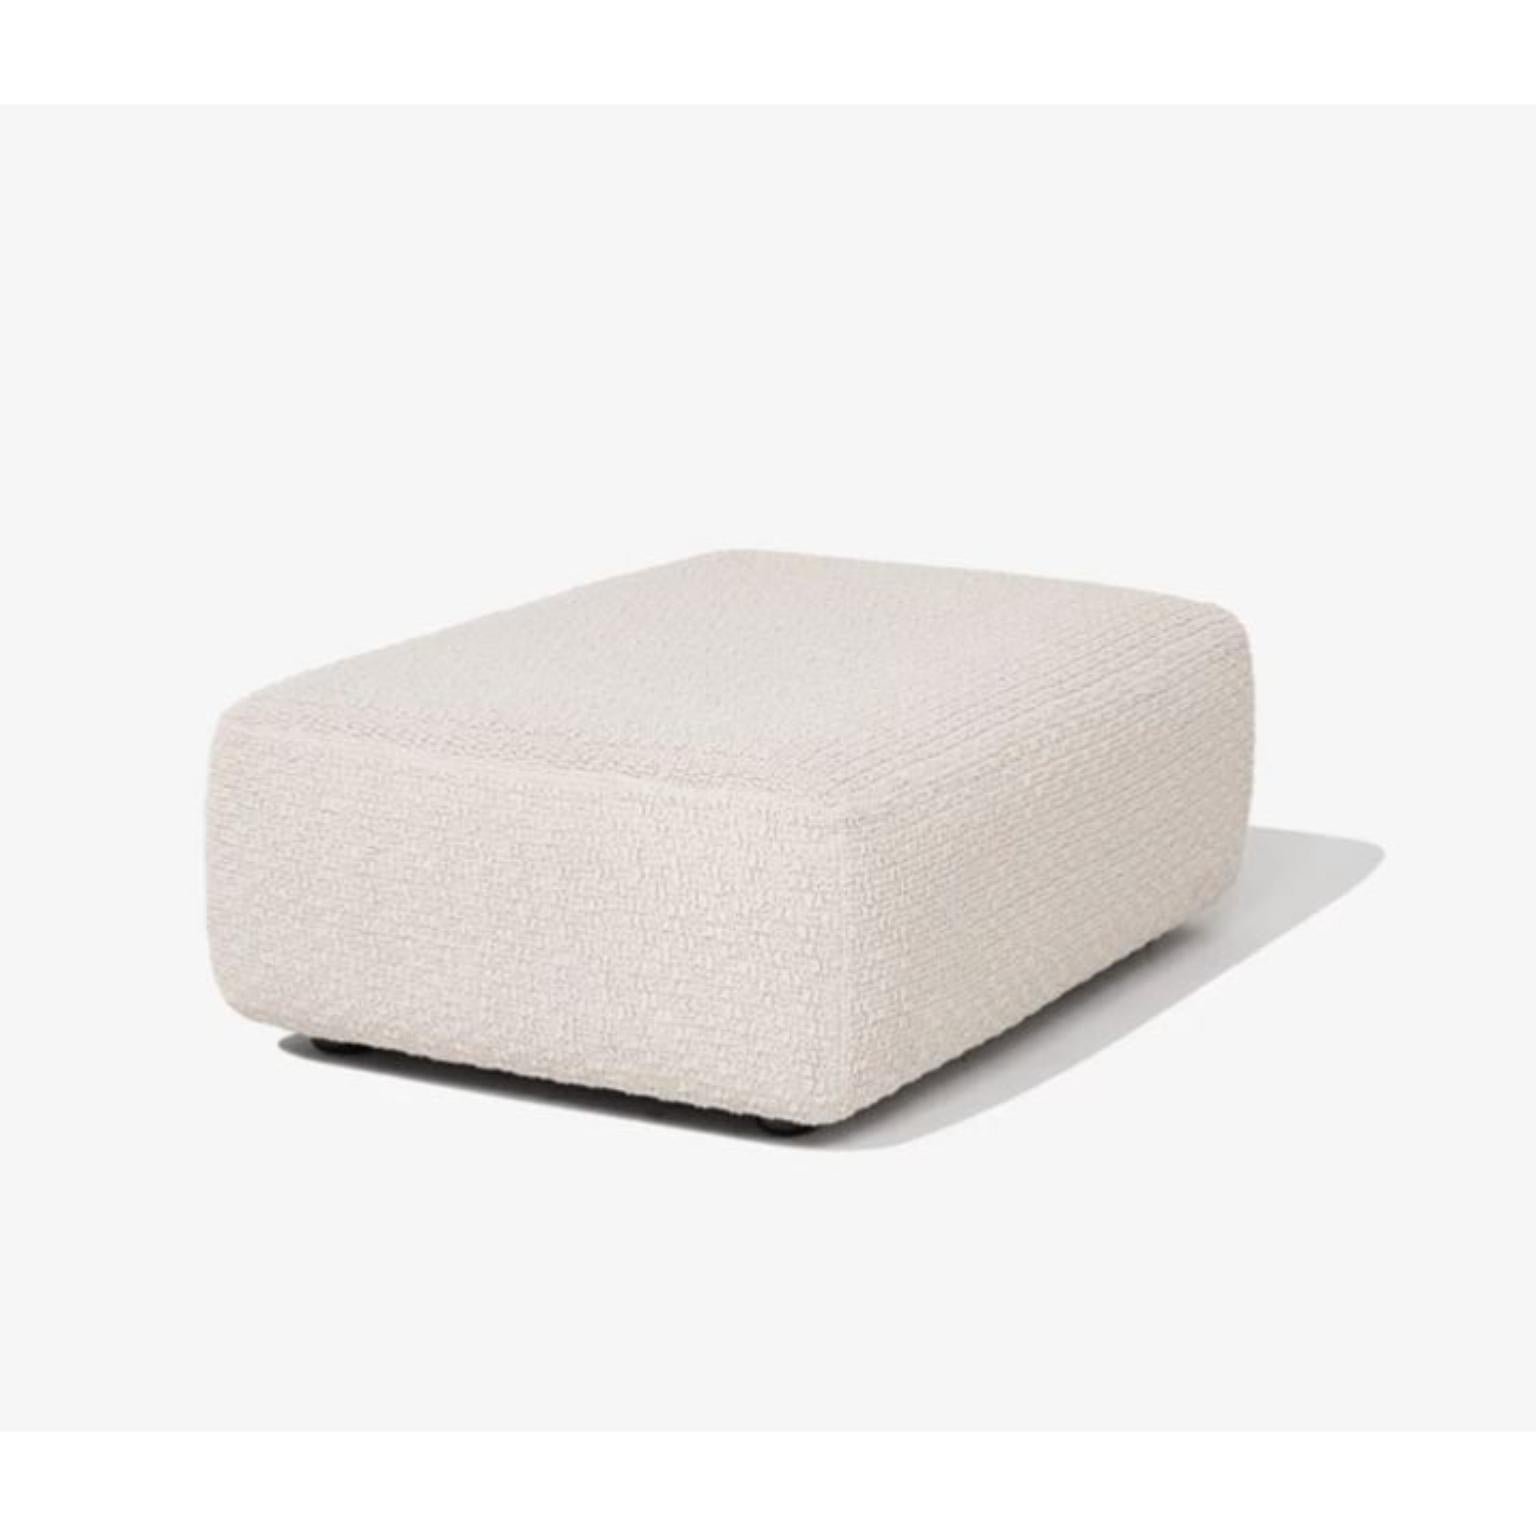 Large Pouf by Wentz
Dimensions: D 110 x W 110 x H 40 cm
Materials: Wooden structure, elastic straps, hypersoft foam and WE–KNIT coating (70% recycled PET + 30% elastane). Wooden feet with matte black paint and a rubberized finish on the bottom to